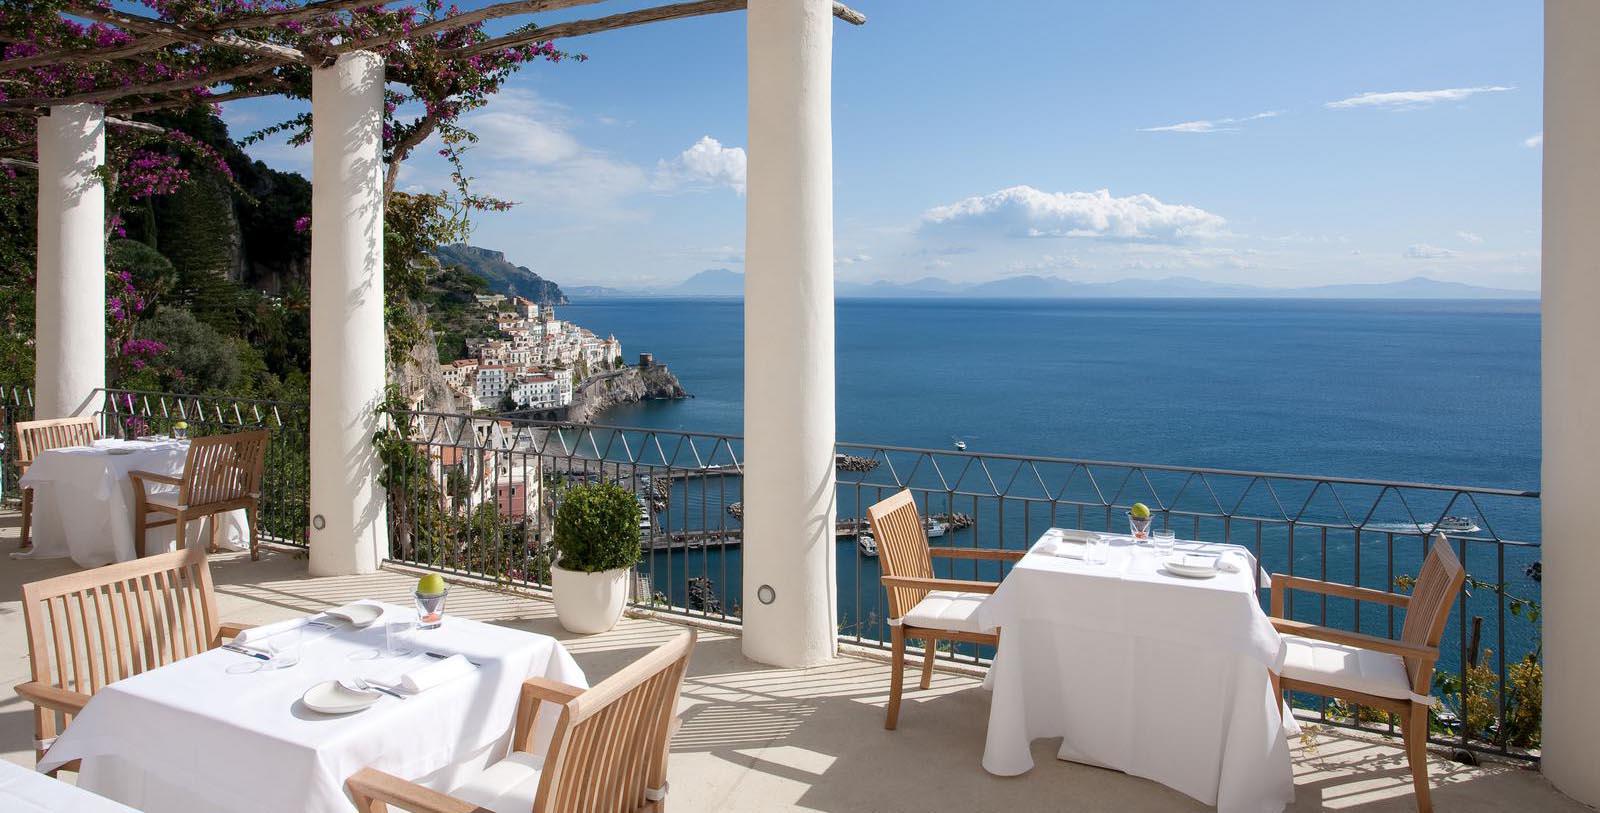 Image of breakfast served at NH Collection Grand Hotel Convento di Amalfi in Amalfi, Italy